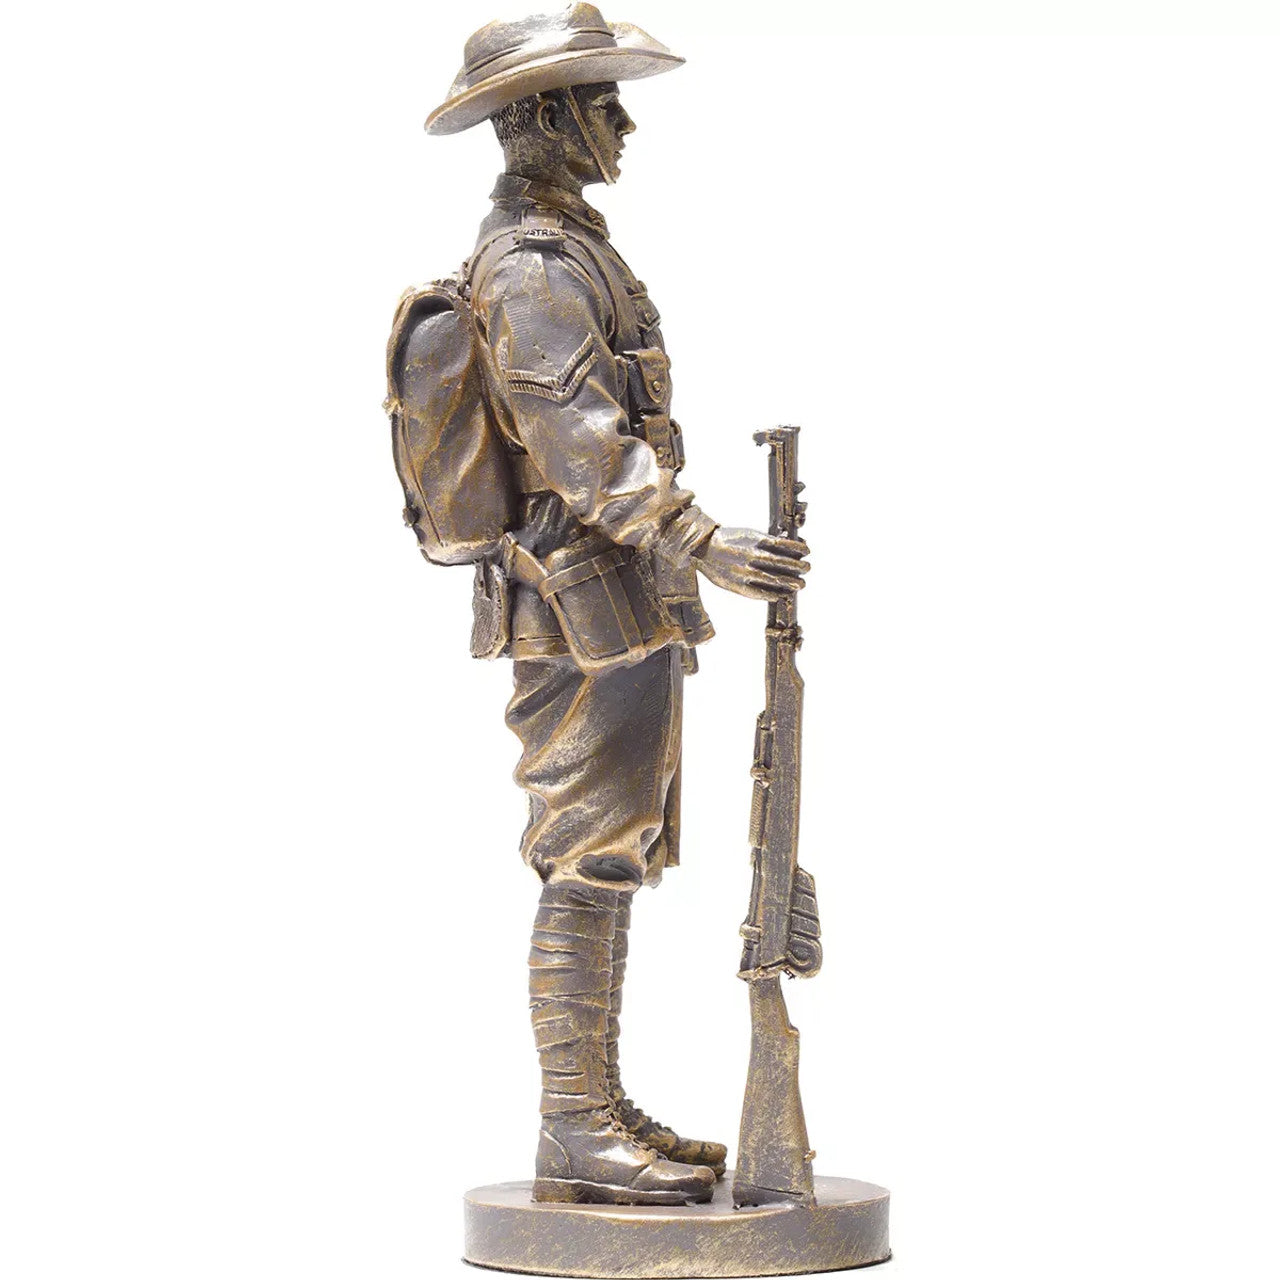 Own the sensational collector's edition of our fantastic Miniature AIF Digger figurine. Only 75 of the Miniature AIF Digger figurines feature this unique gold finish, creating the Collector's Gold Edition. www.defenceqstore.com.au